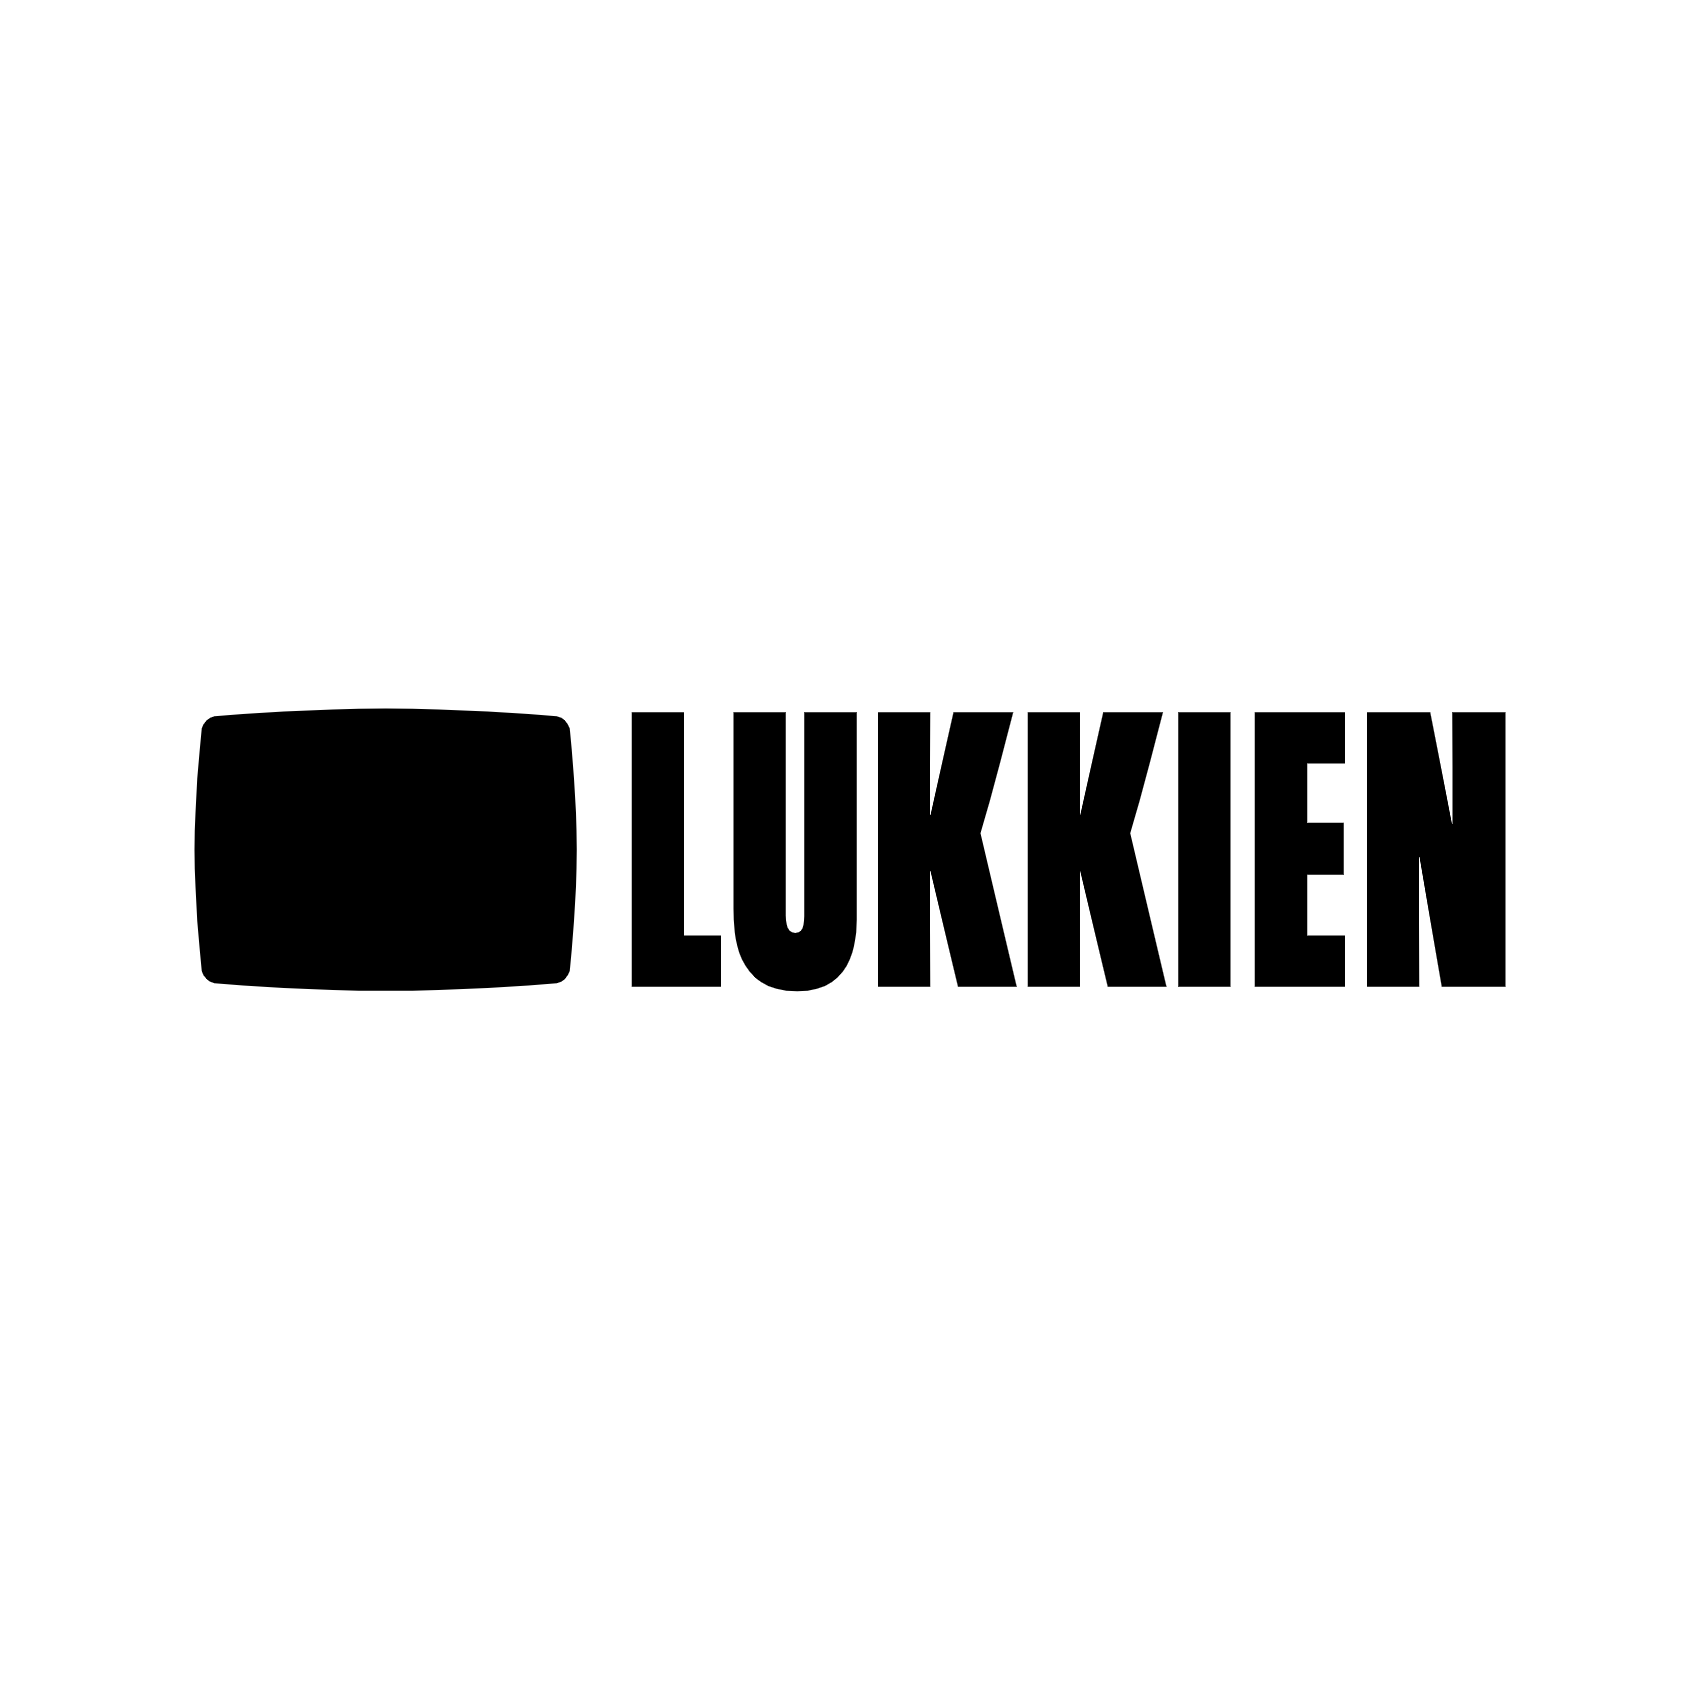 Download Lukkien Logo PNG and Vector (PDF, SVG, Ai, EPS) Free